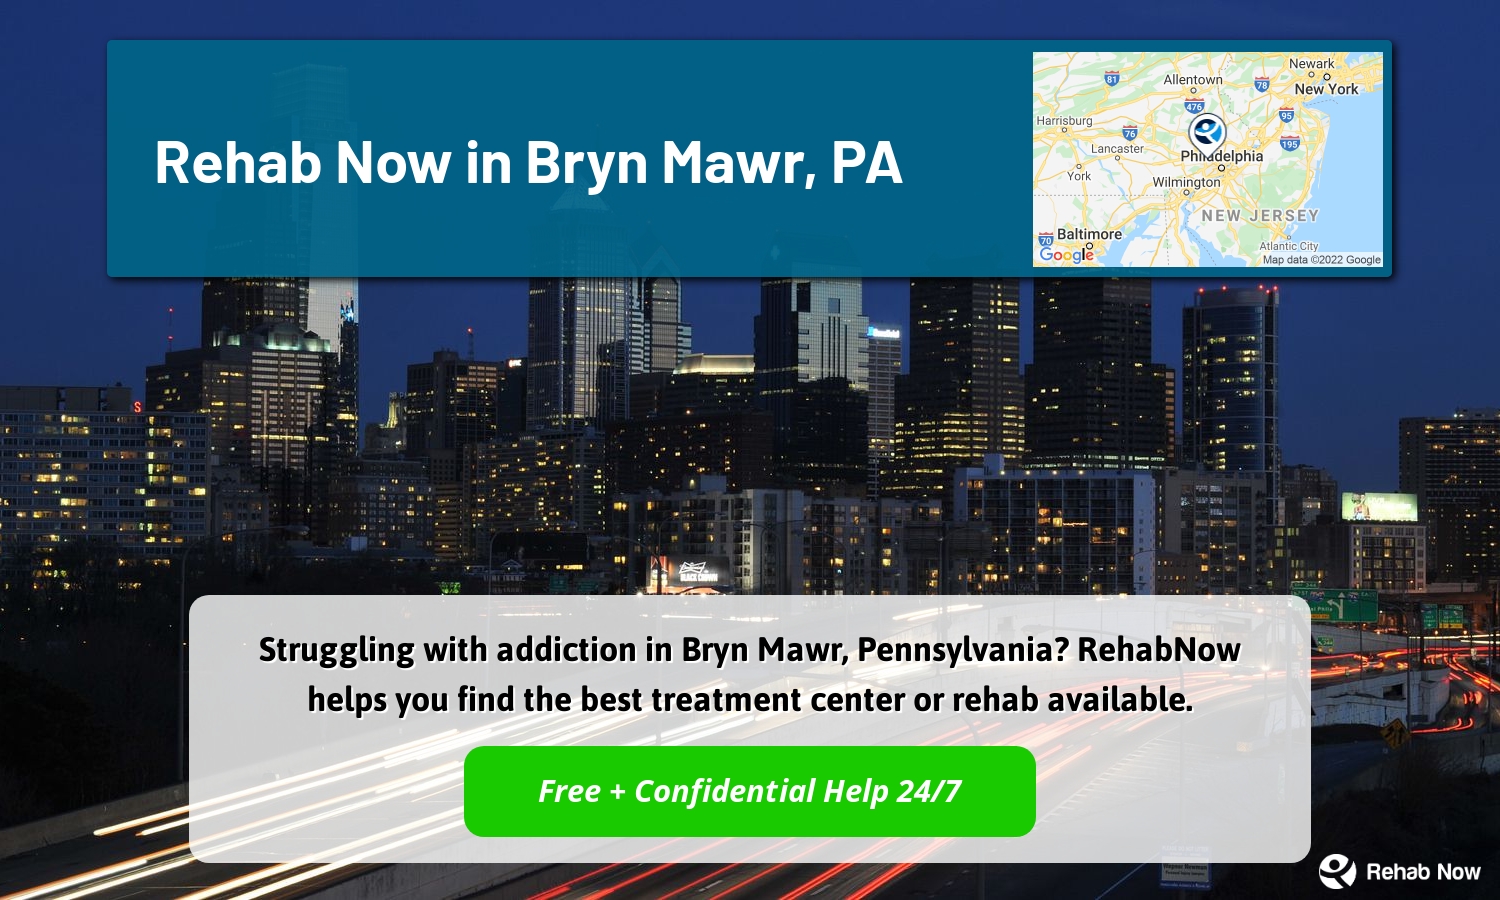 Struggling with addiction in Bryn Mawr, Pennsylvania? RehabNow helps you find the best treatment center or rehab available.